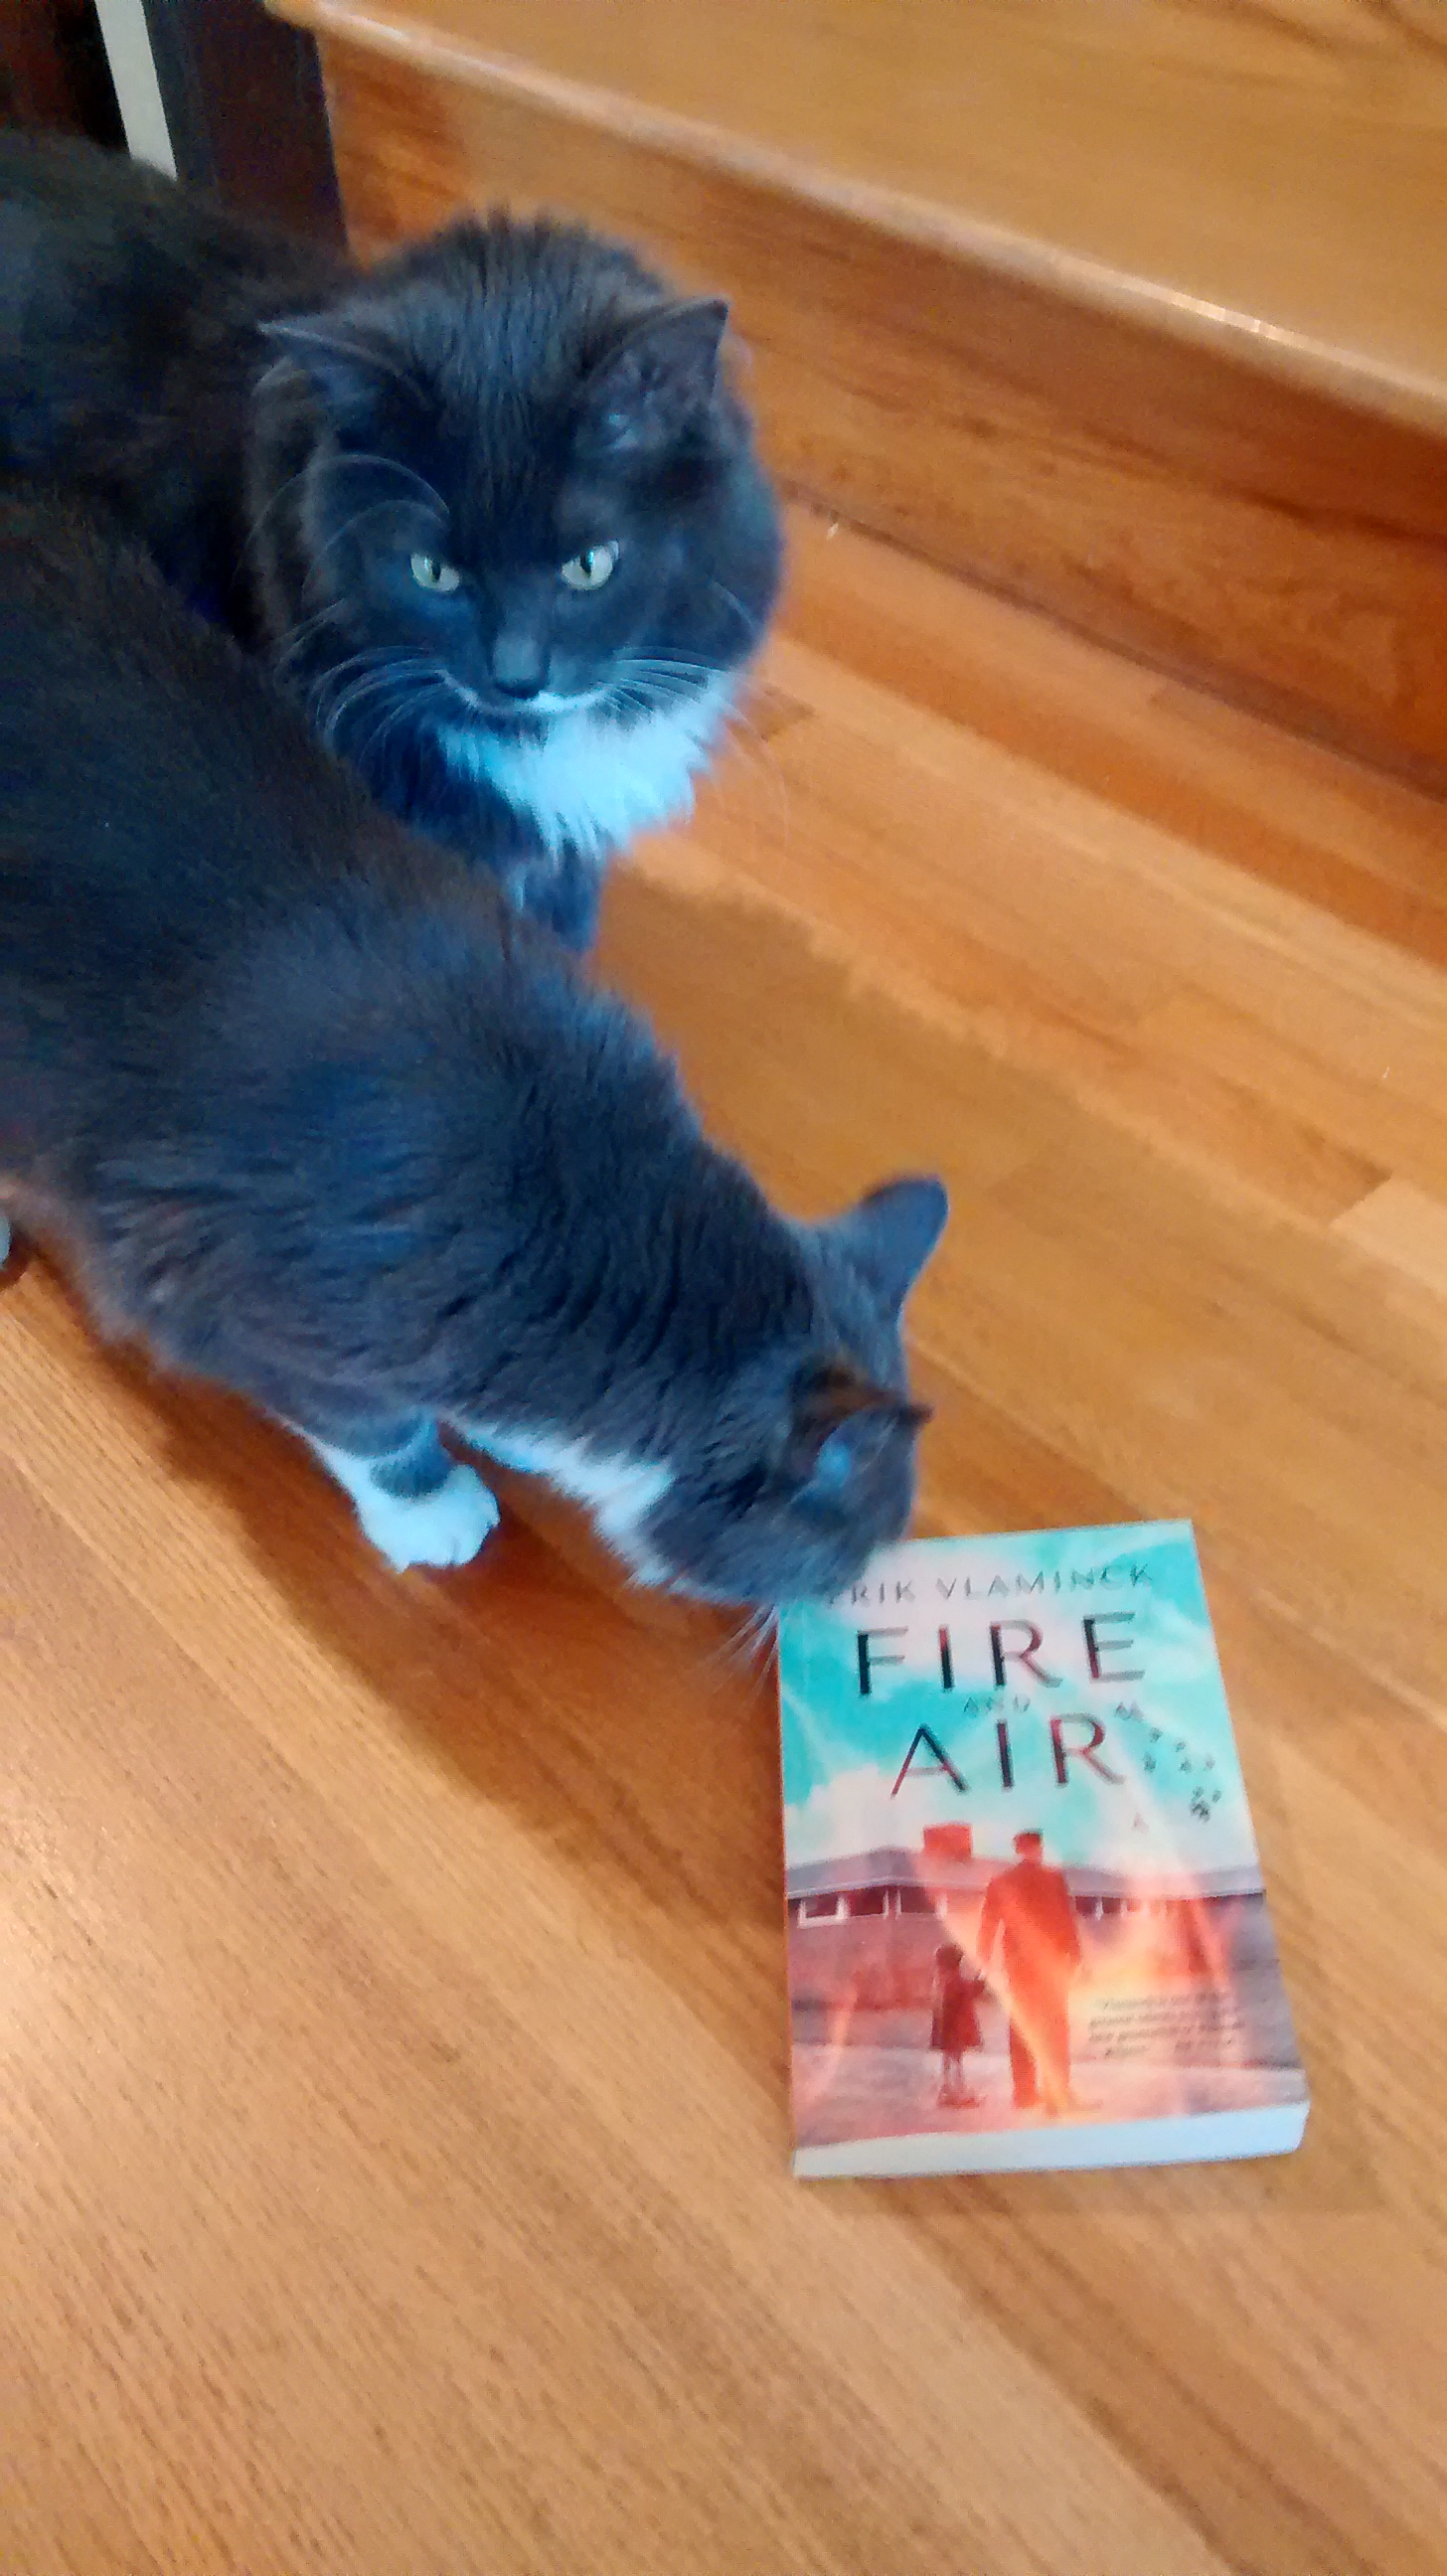 Smokey was ambivalent about this book, but Pearl was willing to take a look